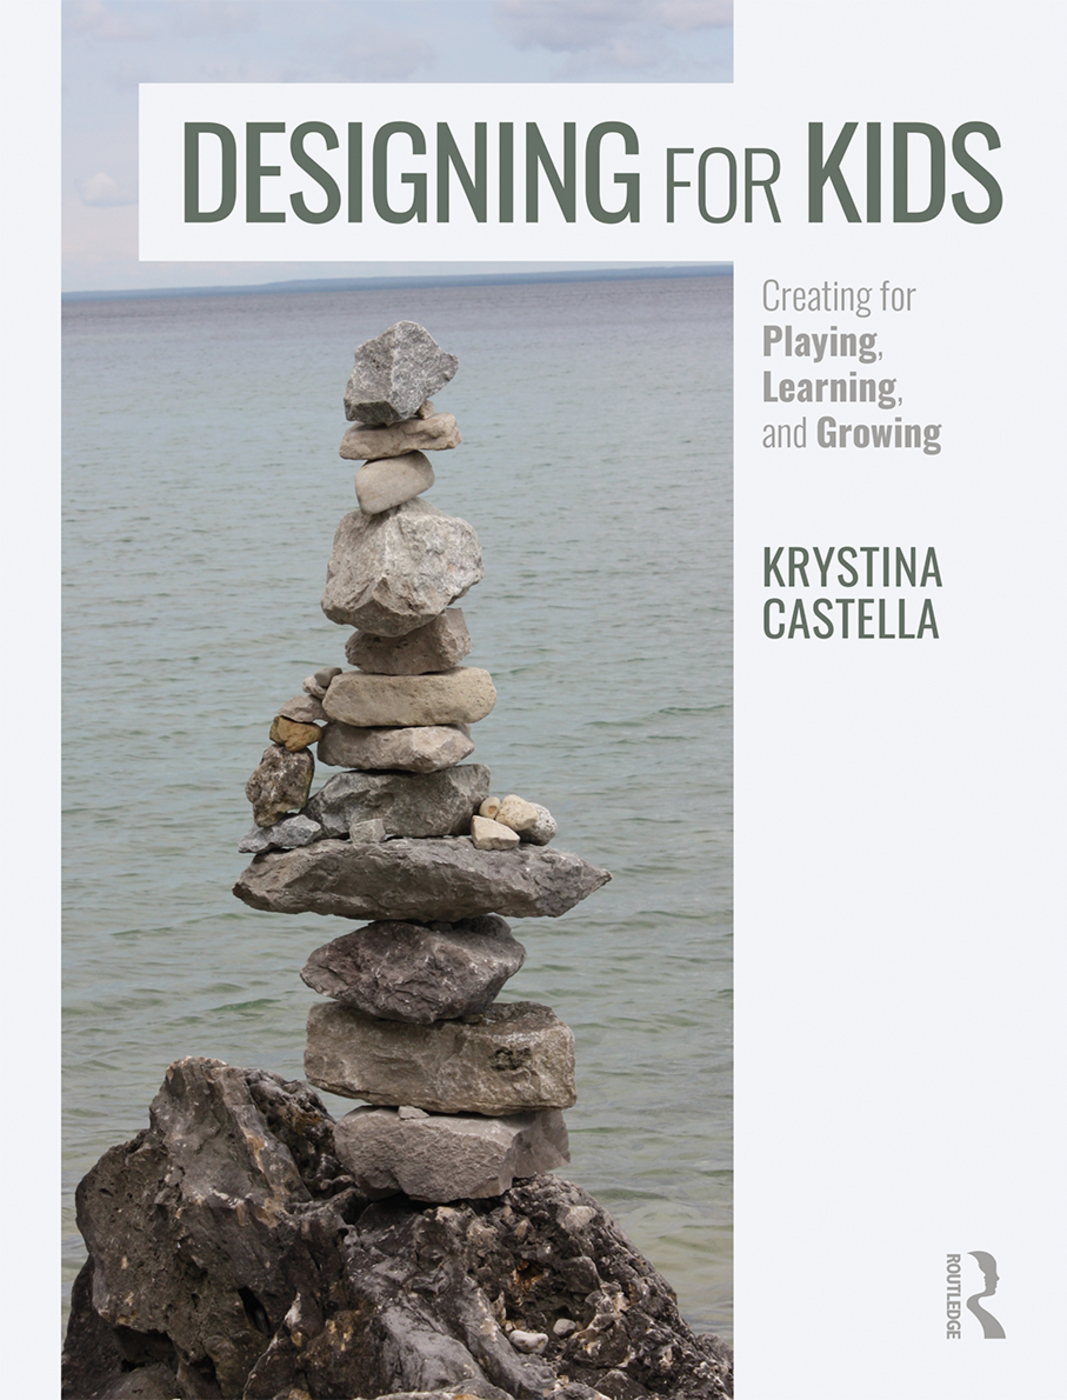 Photo of Designing for Kids book cover.